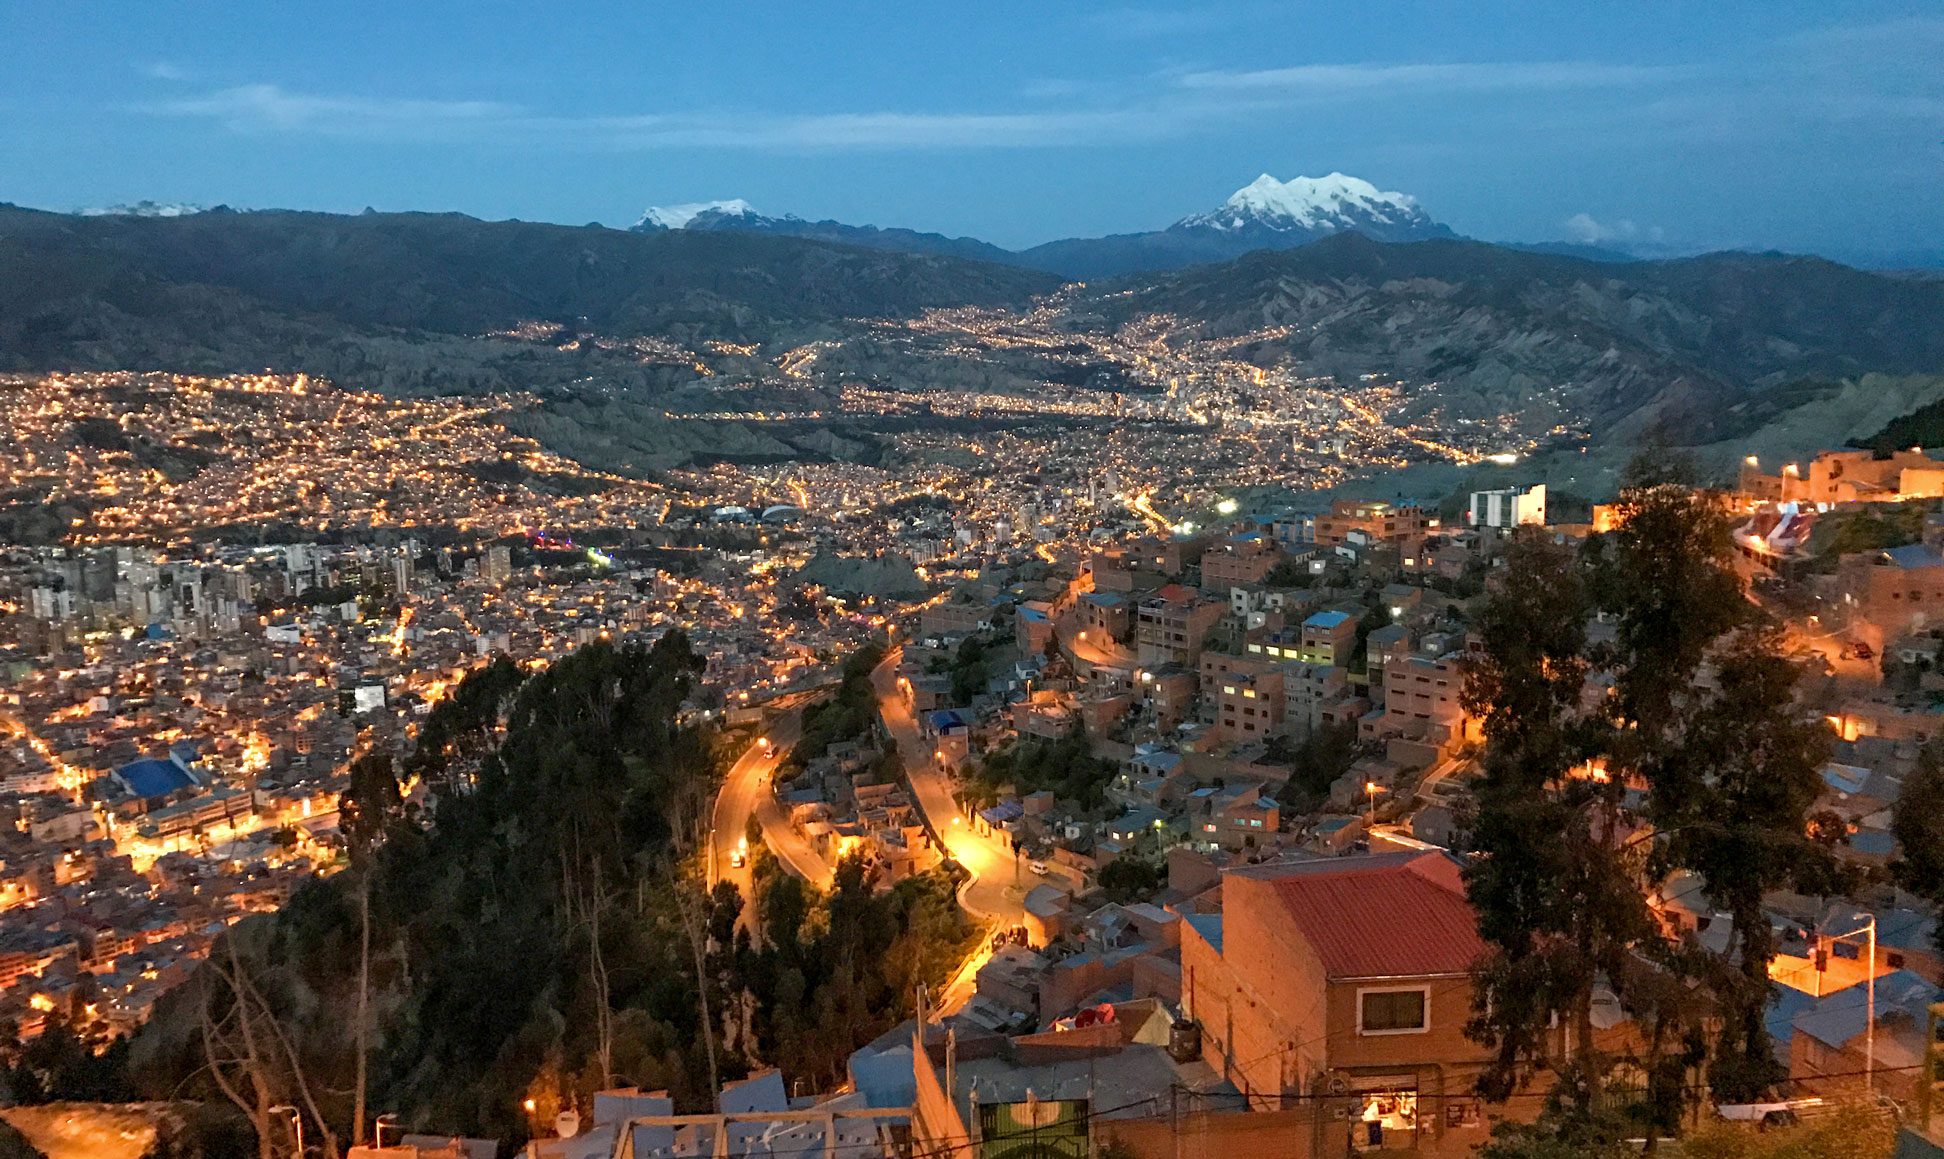 View of La Paz with Illimani, the country's second highest peak